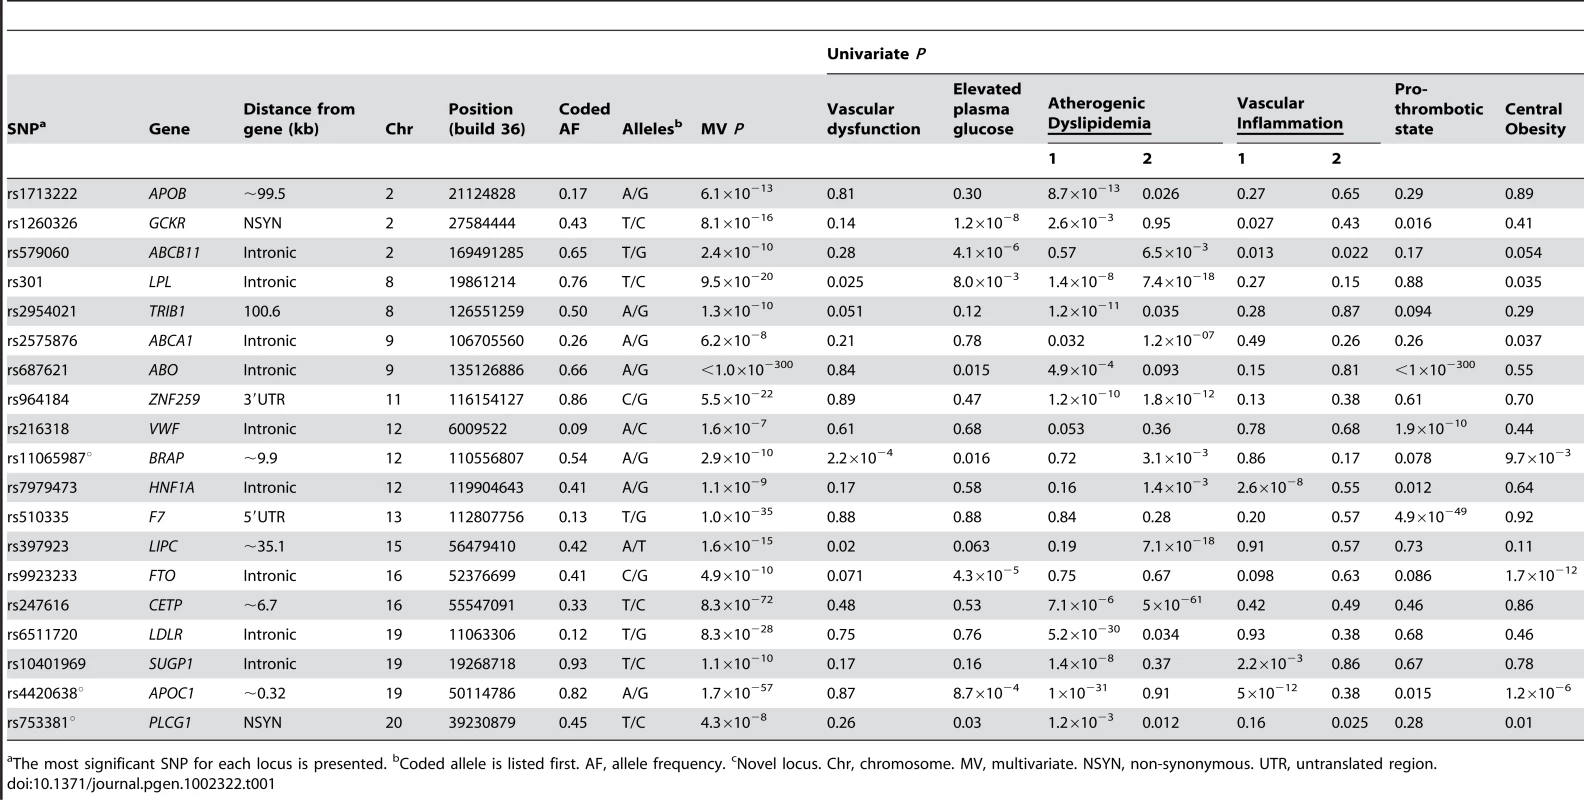 Associations for 19 known, confirmed, or possible new loci for metabolic syndrome trait dimensions in n = 19,468 European Americans from five studies.